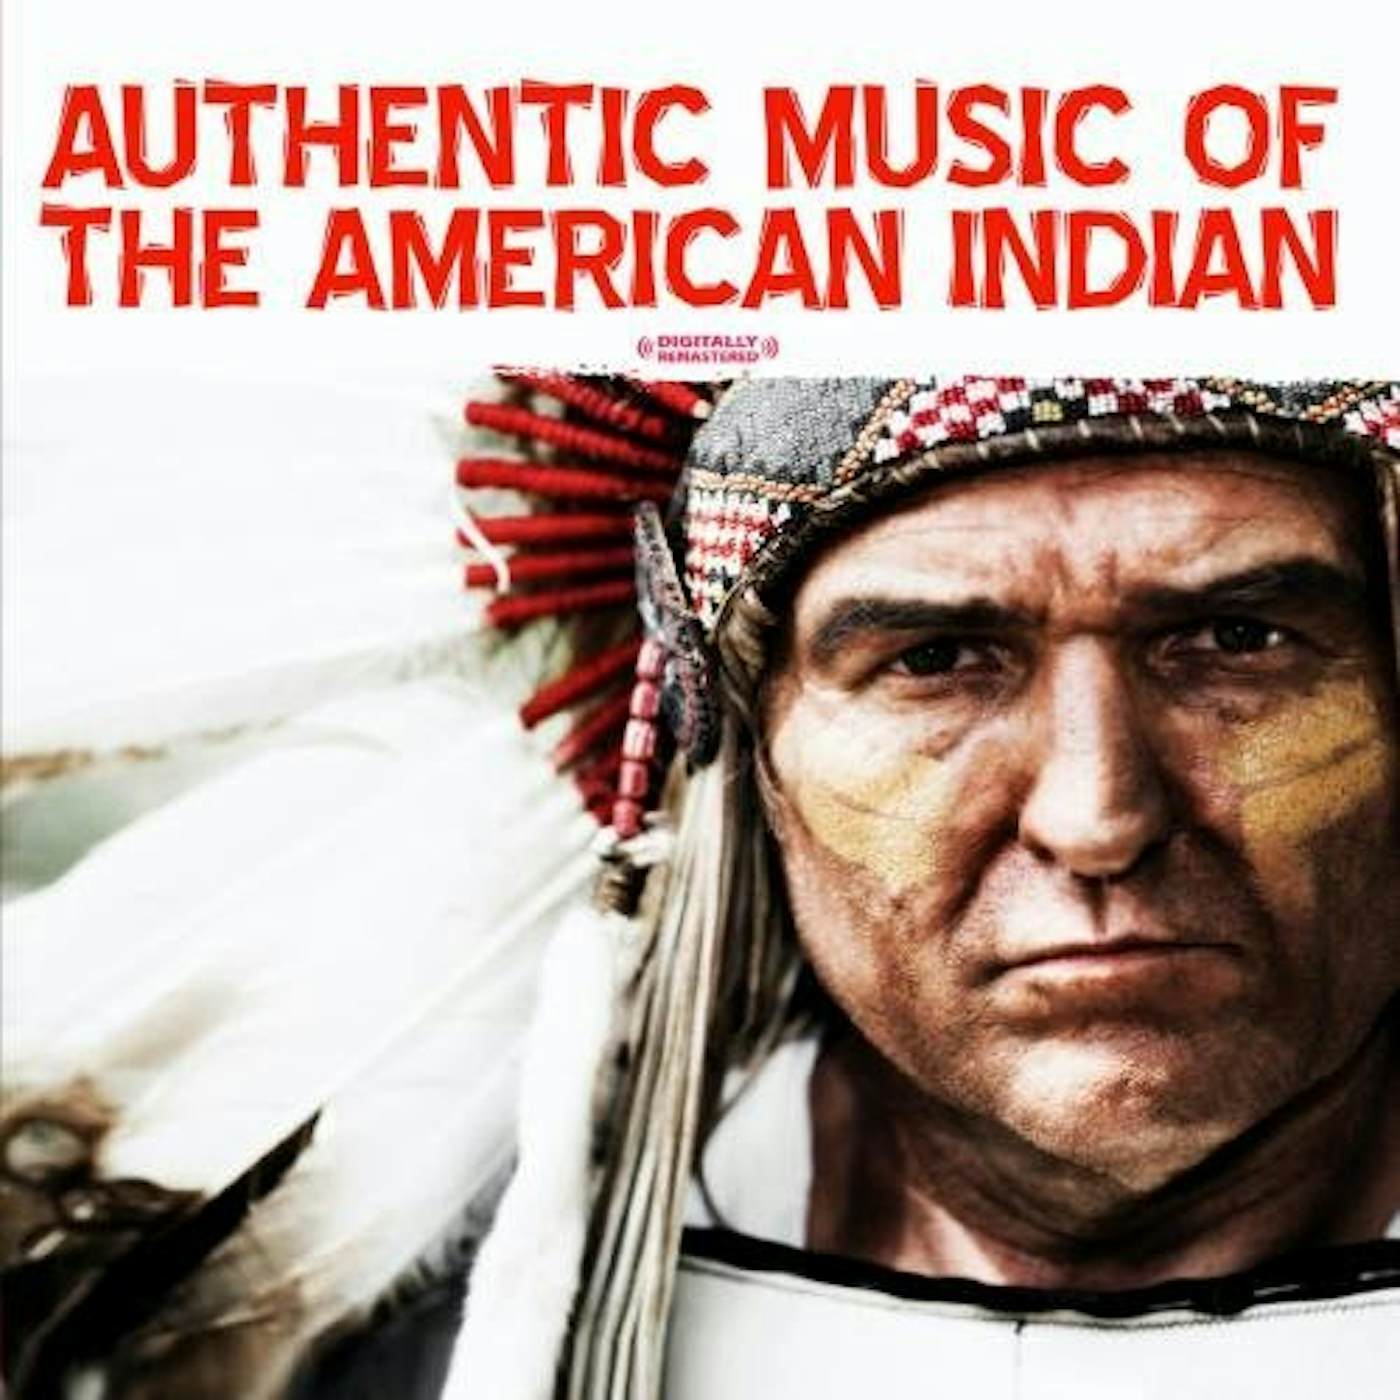 American Indian Ensemble AUTHENTIC MUSIC OF THE AMERICAN INDIAN CD